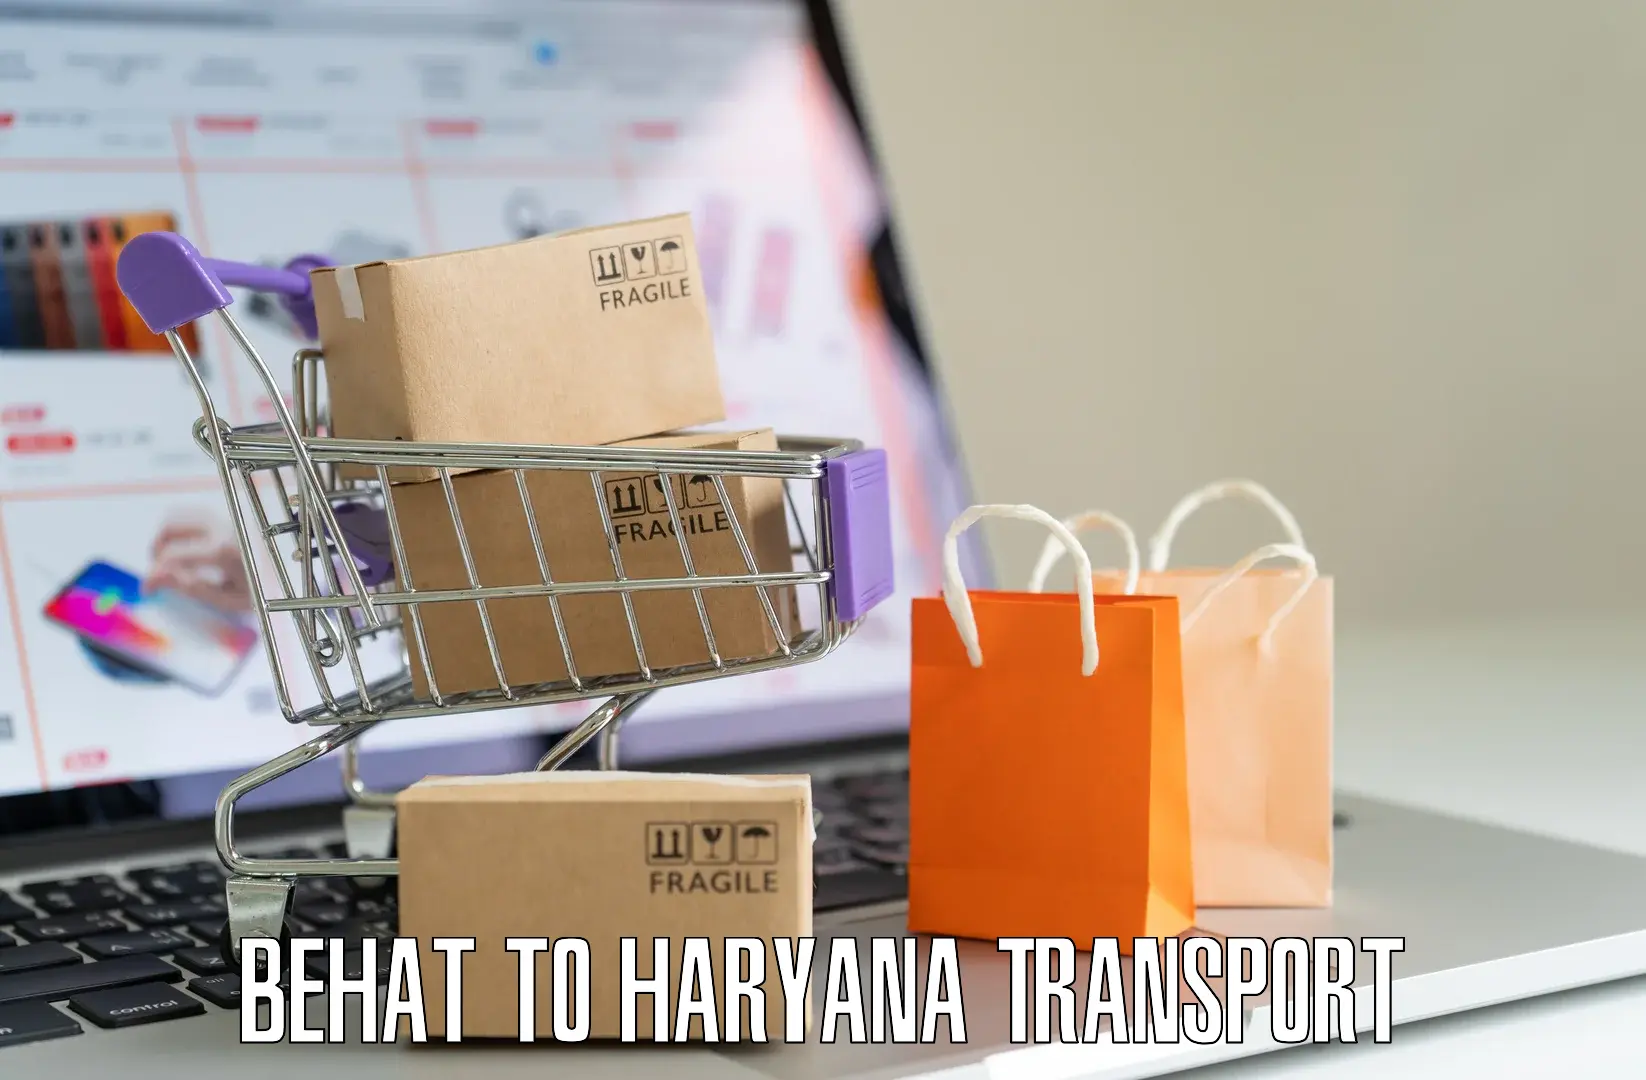 Transport bike from one state to another Behat to Haryana